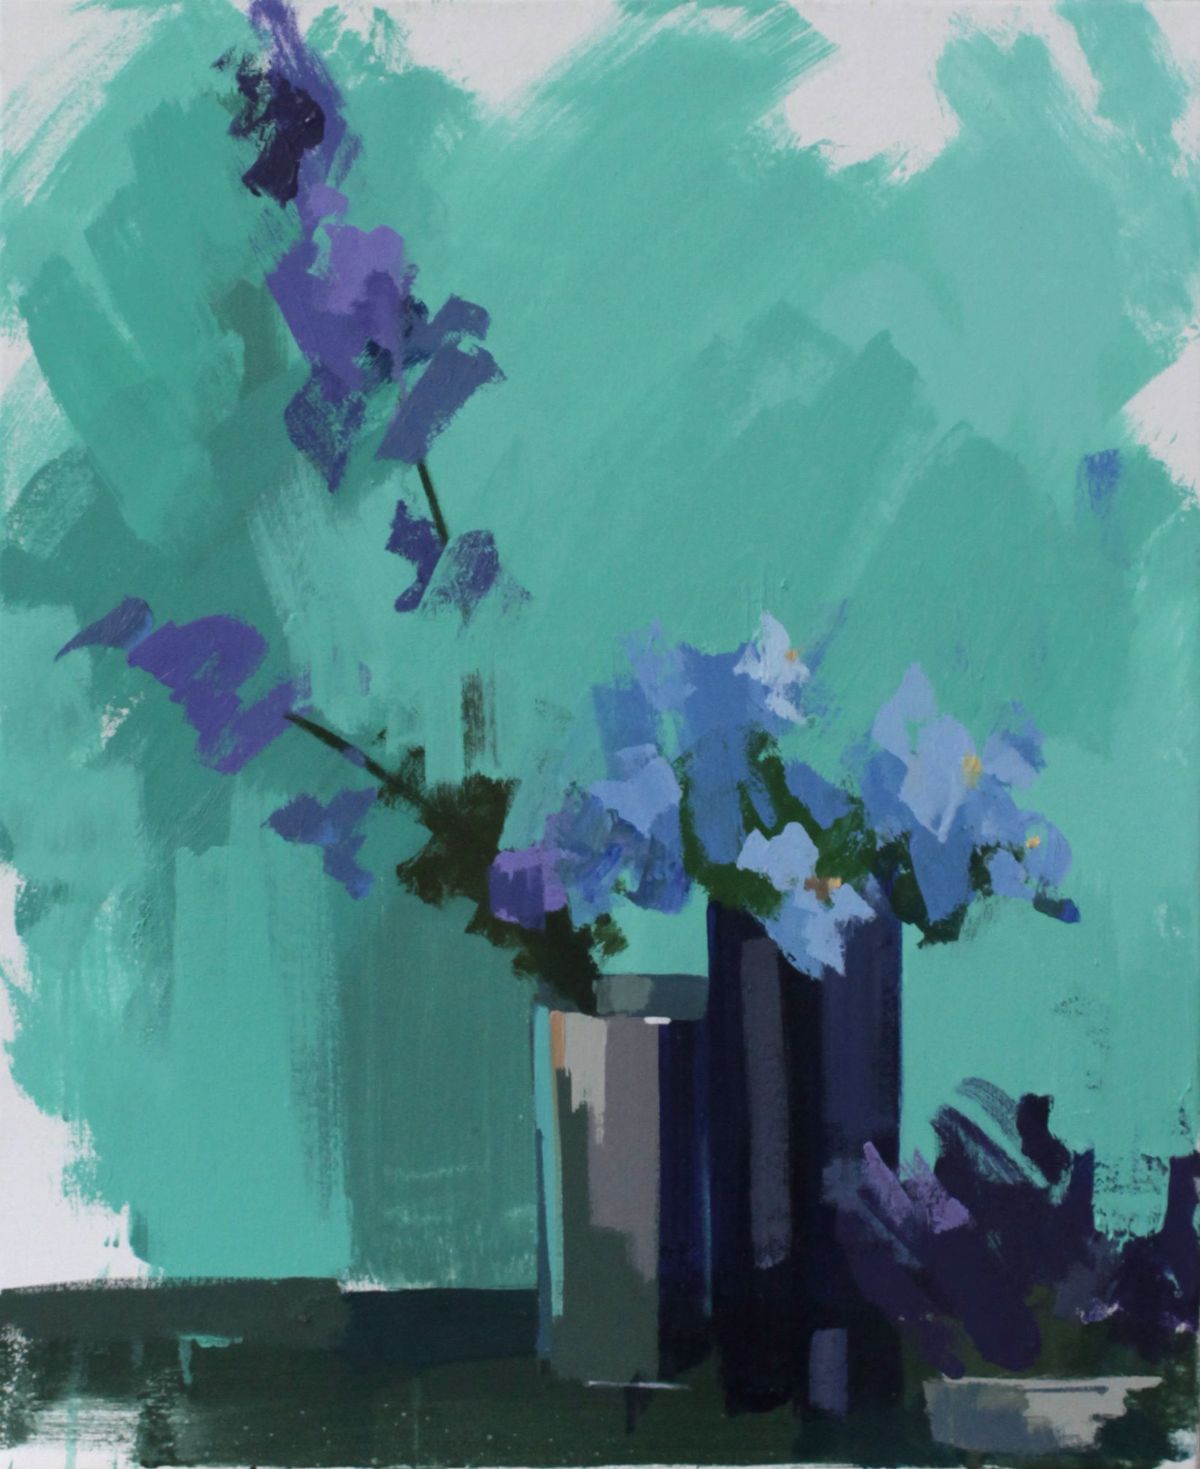 Larkspur and Forget-me-nots study